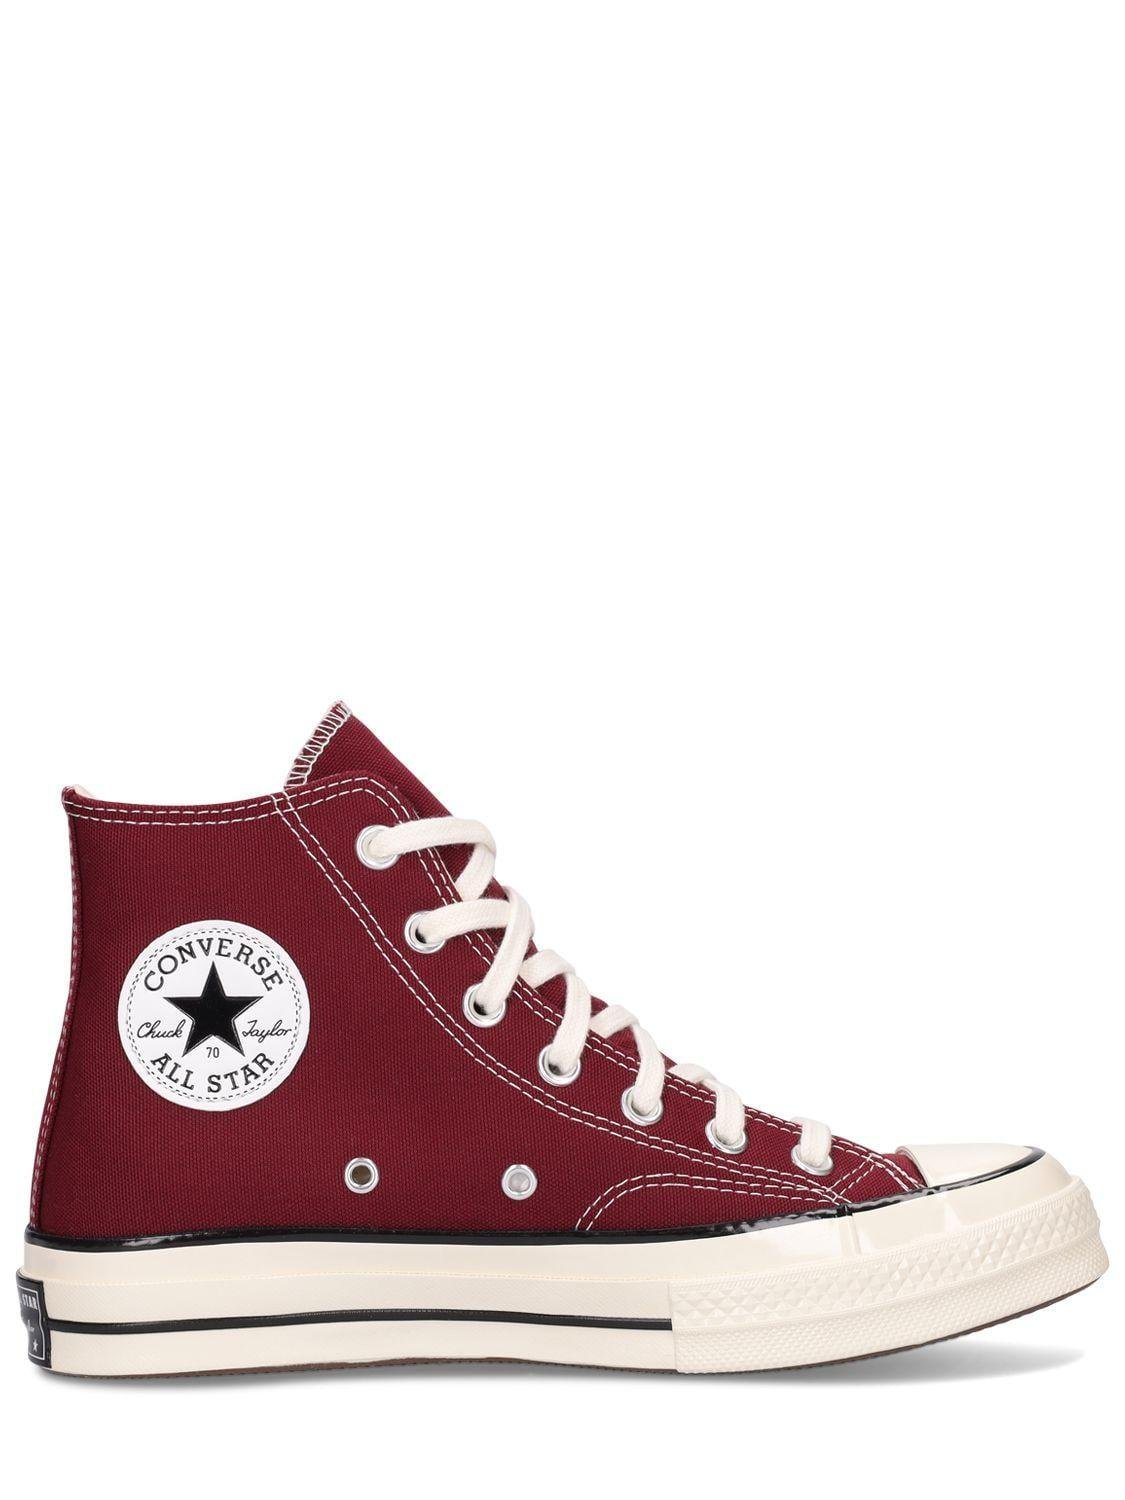 Converse Chuck 70 Vintage Canvas Sneakers in Red | Lyst